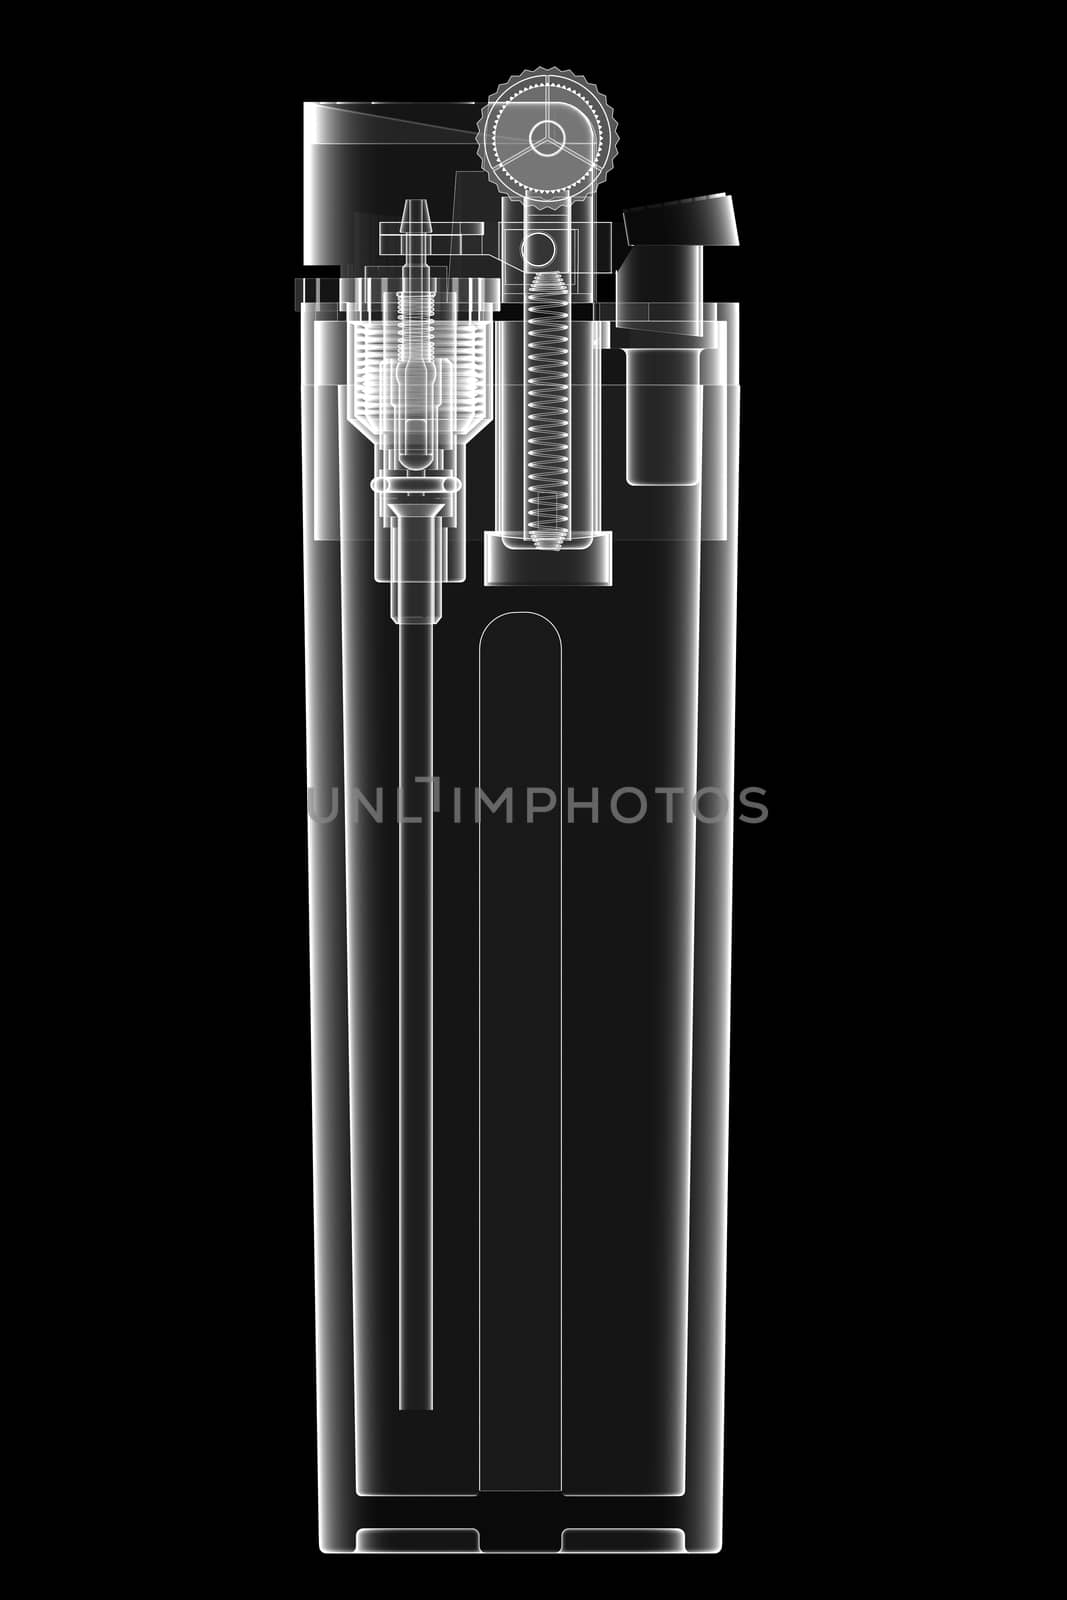 X-ray view of lighter isolated on black background by oneo